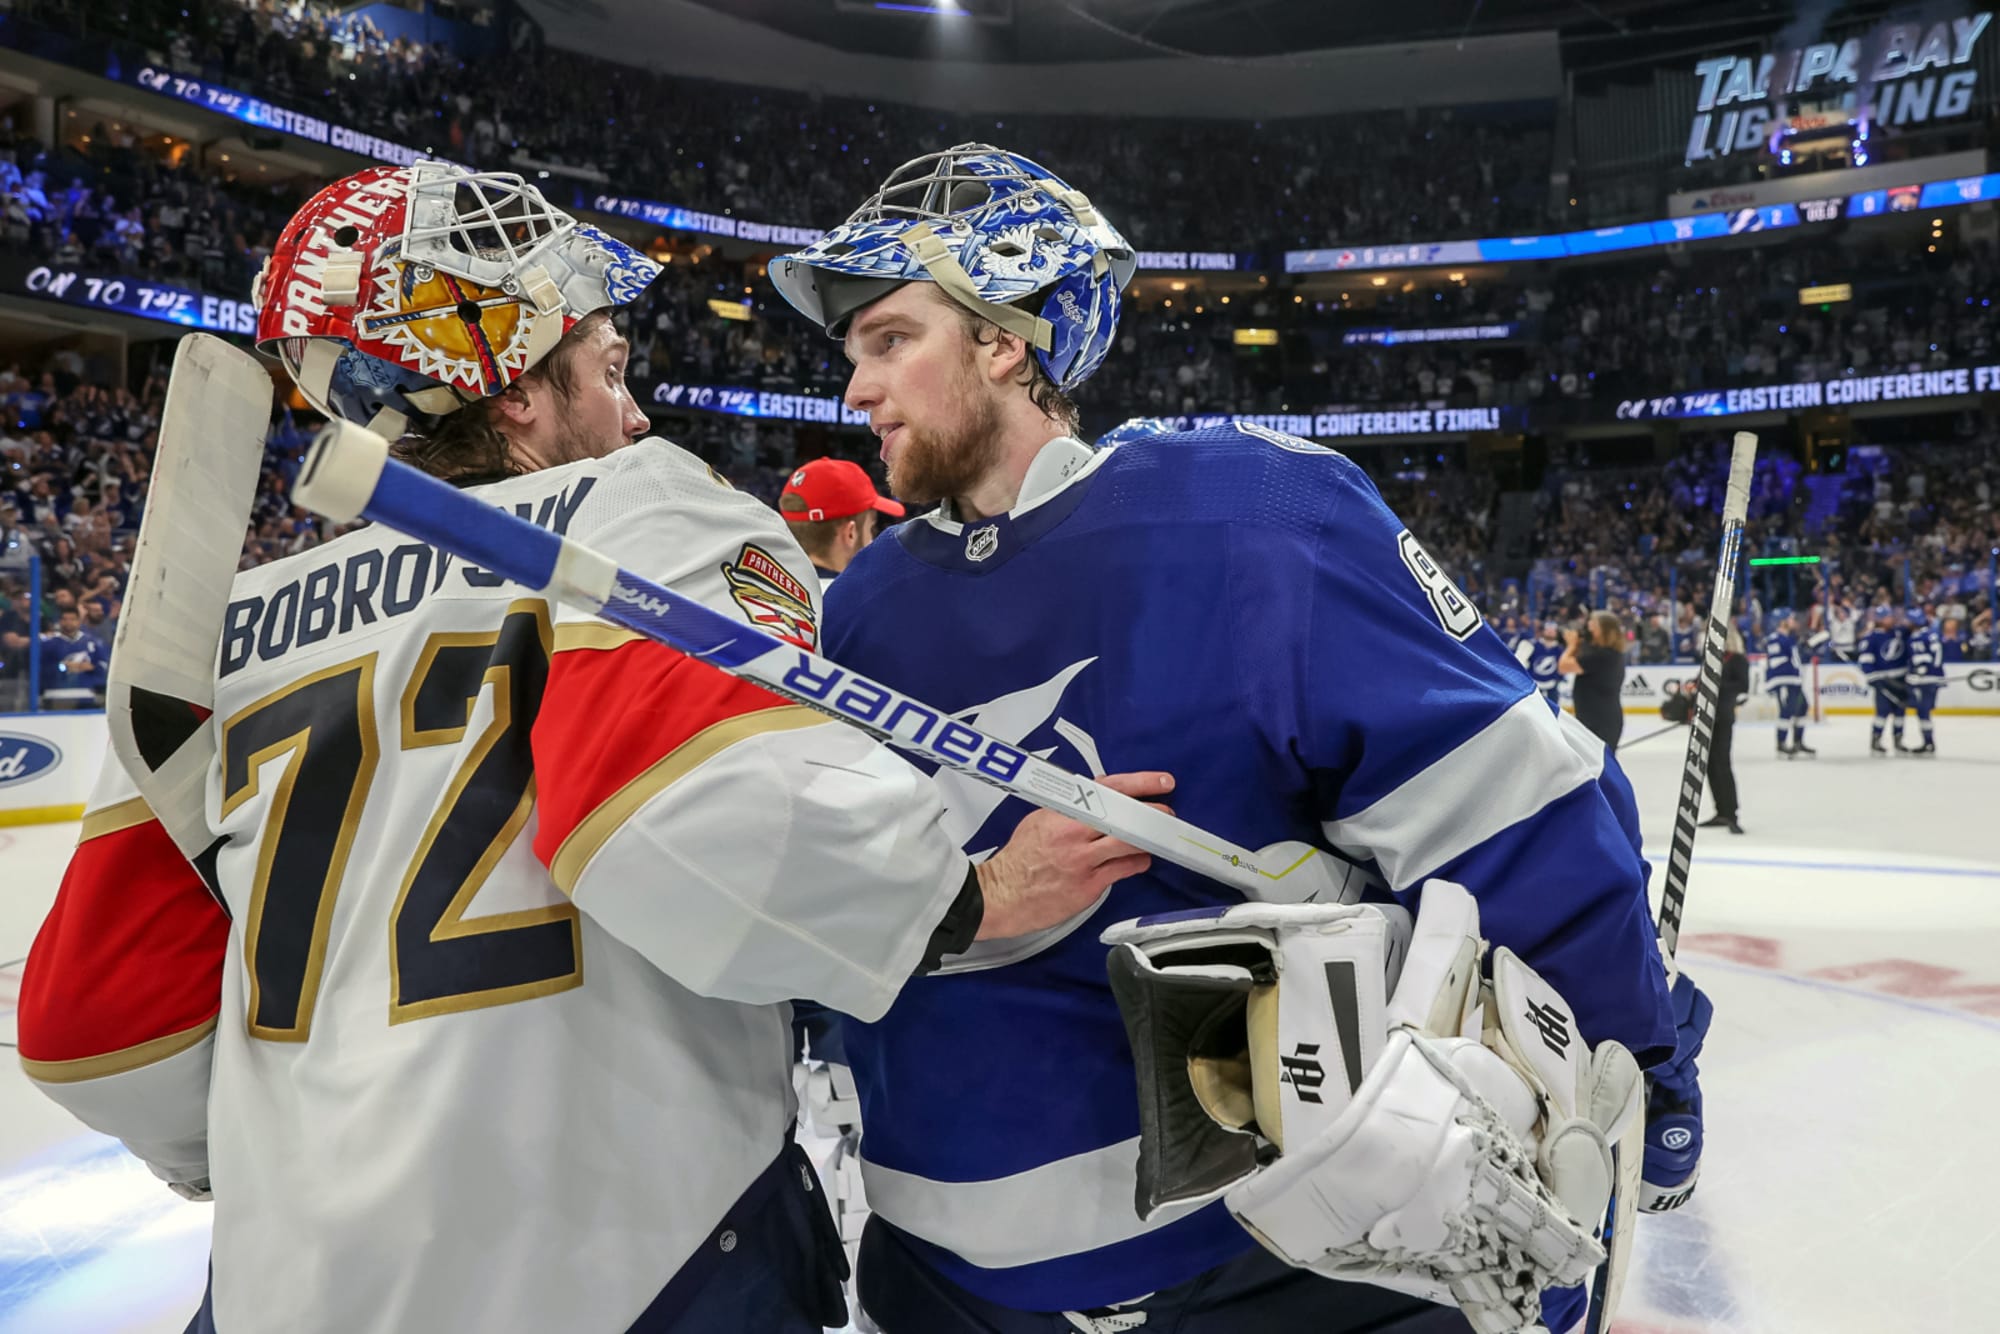 Florida Panthers at Tampa Bay Lightning: Game Preview, Odds and More